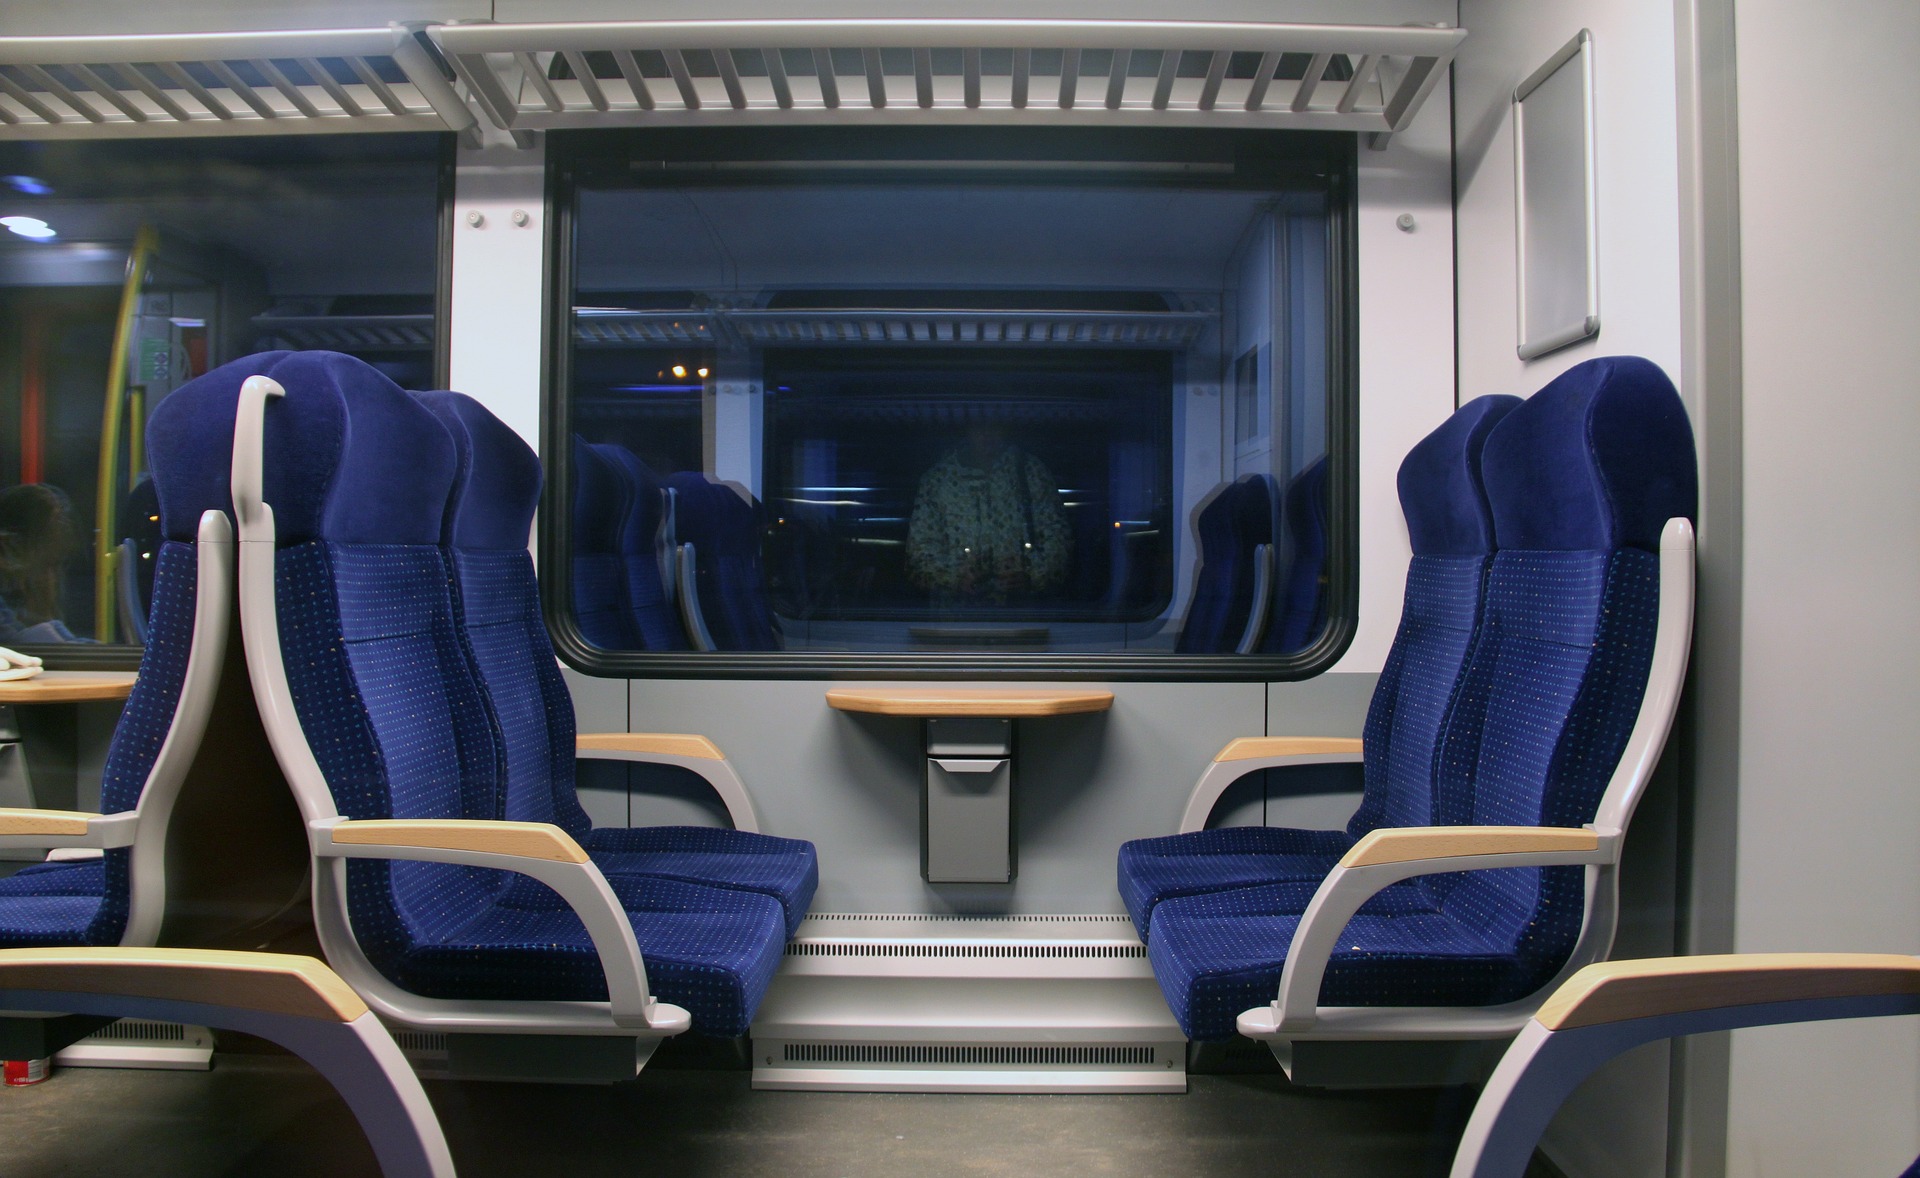 Blue-colored seats in a train | Source: Pixabay